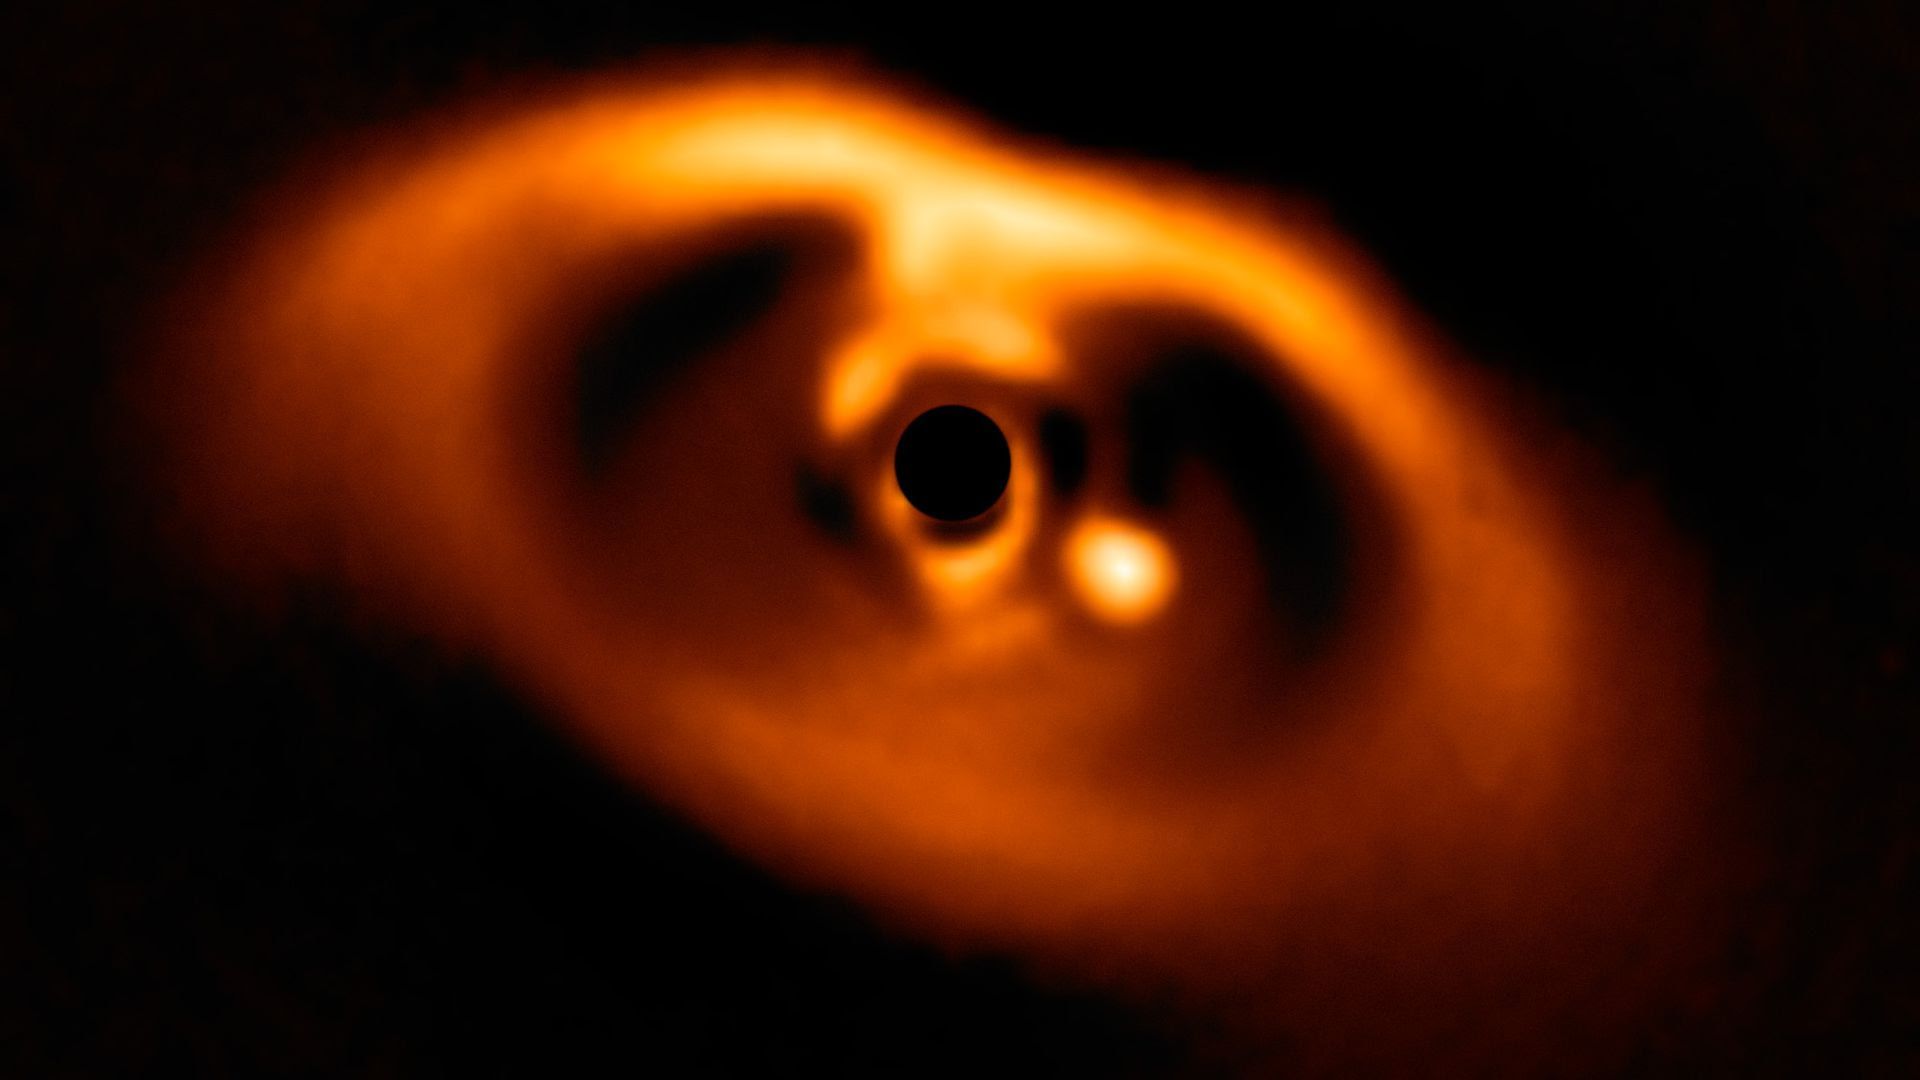 Image of a planet caught in the very act of formation around a dwarf star